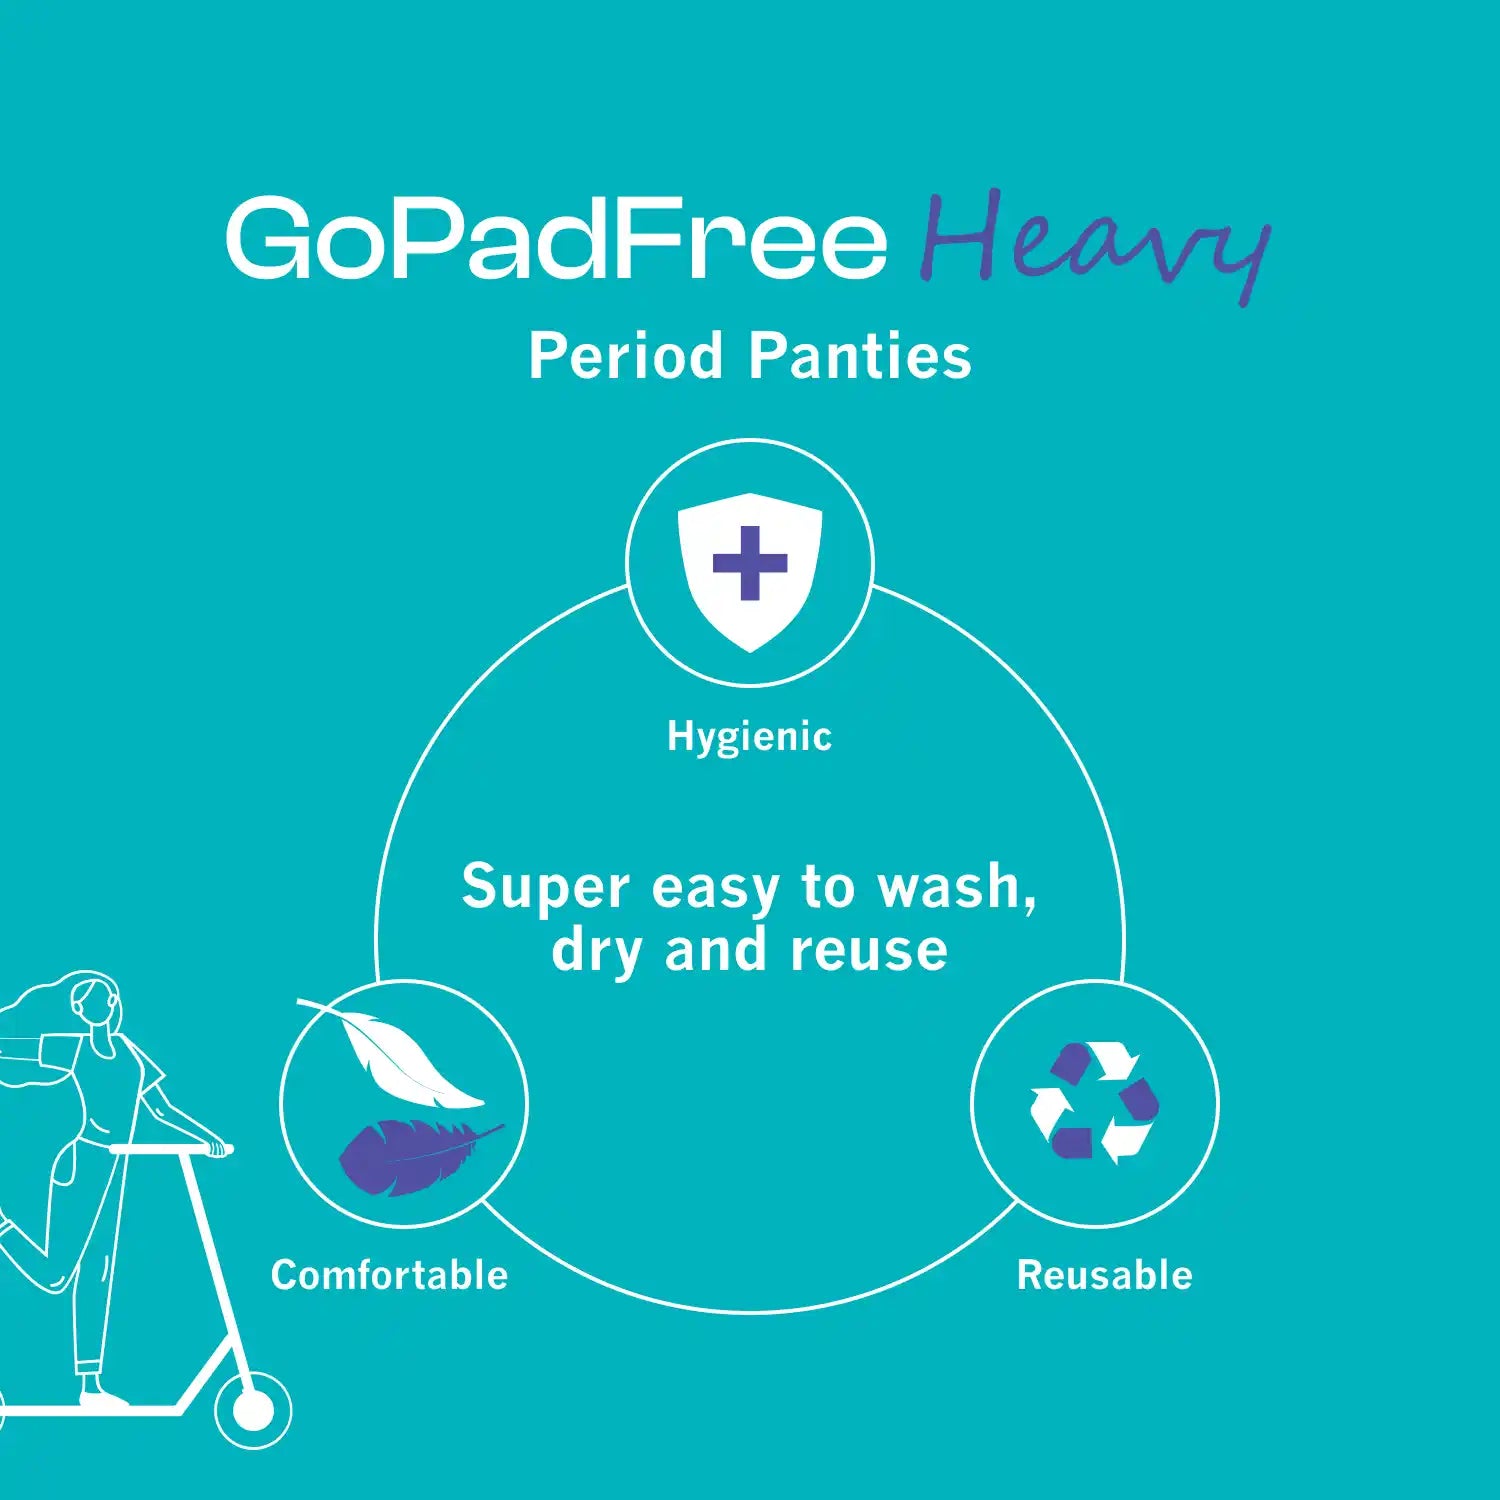 gopadfree heavy period panty features